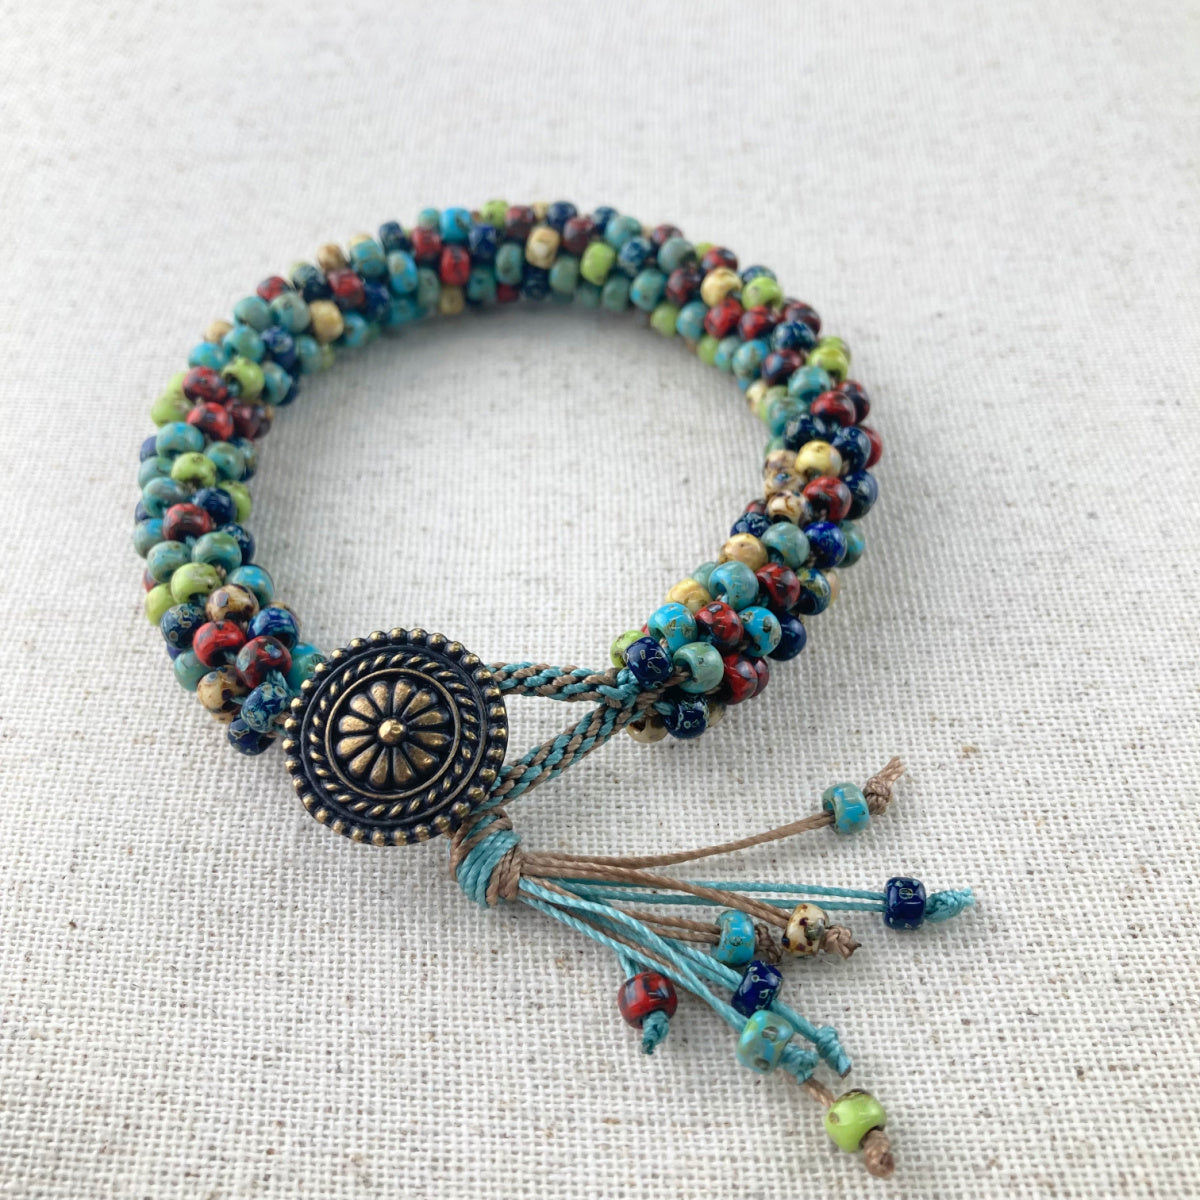 Kumihimo Handcrafted Button Closure Bracelet